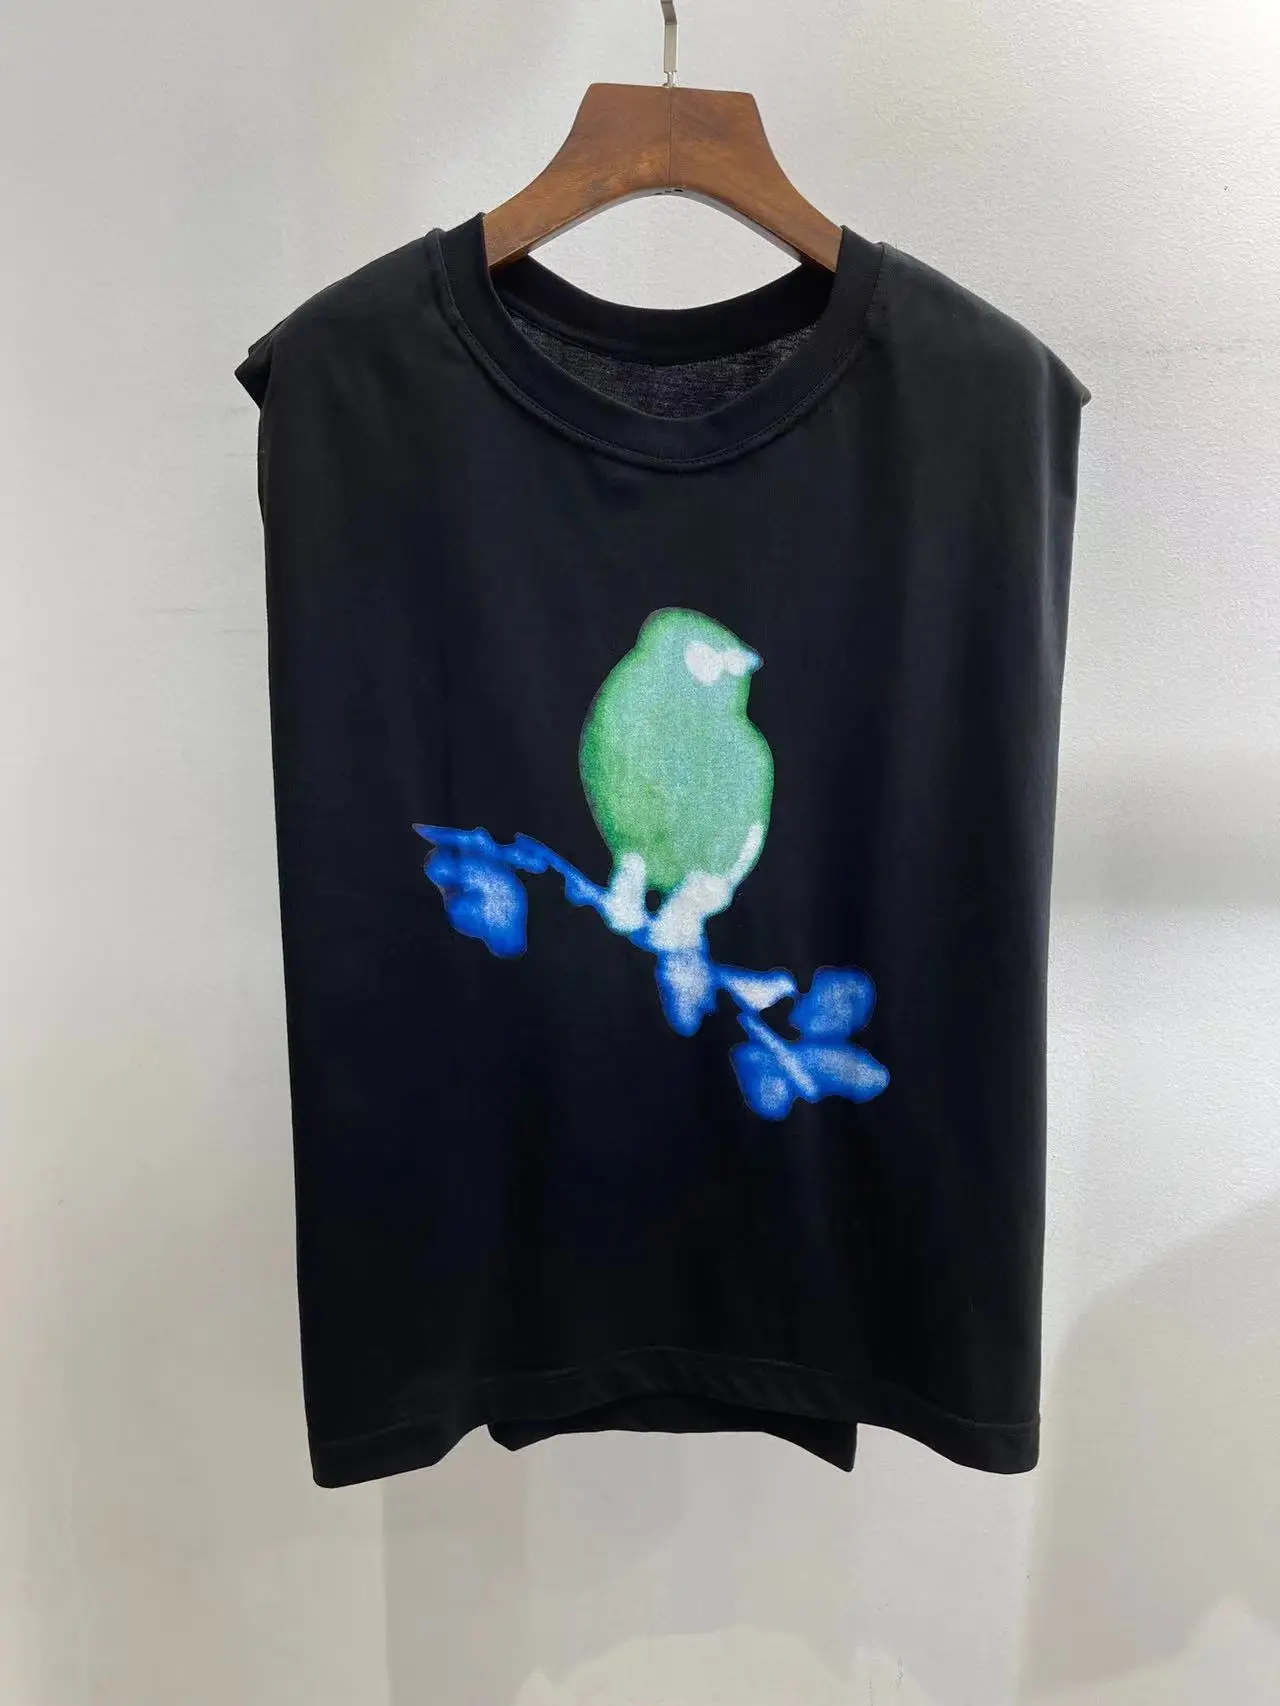 Fyion Sicily Loose T-Shirts 2022 Summer New Fashion Design Women Runway High Quality Vintage Bird Print Casual Black / White Top